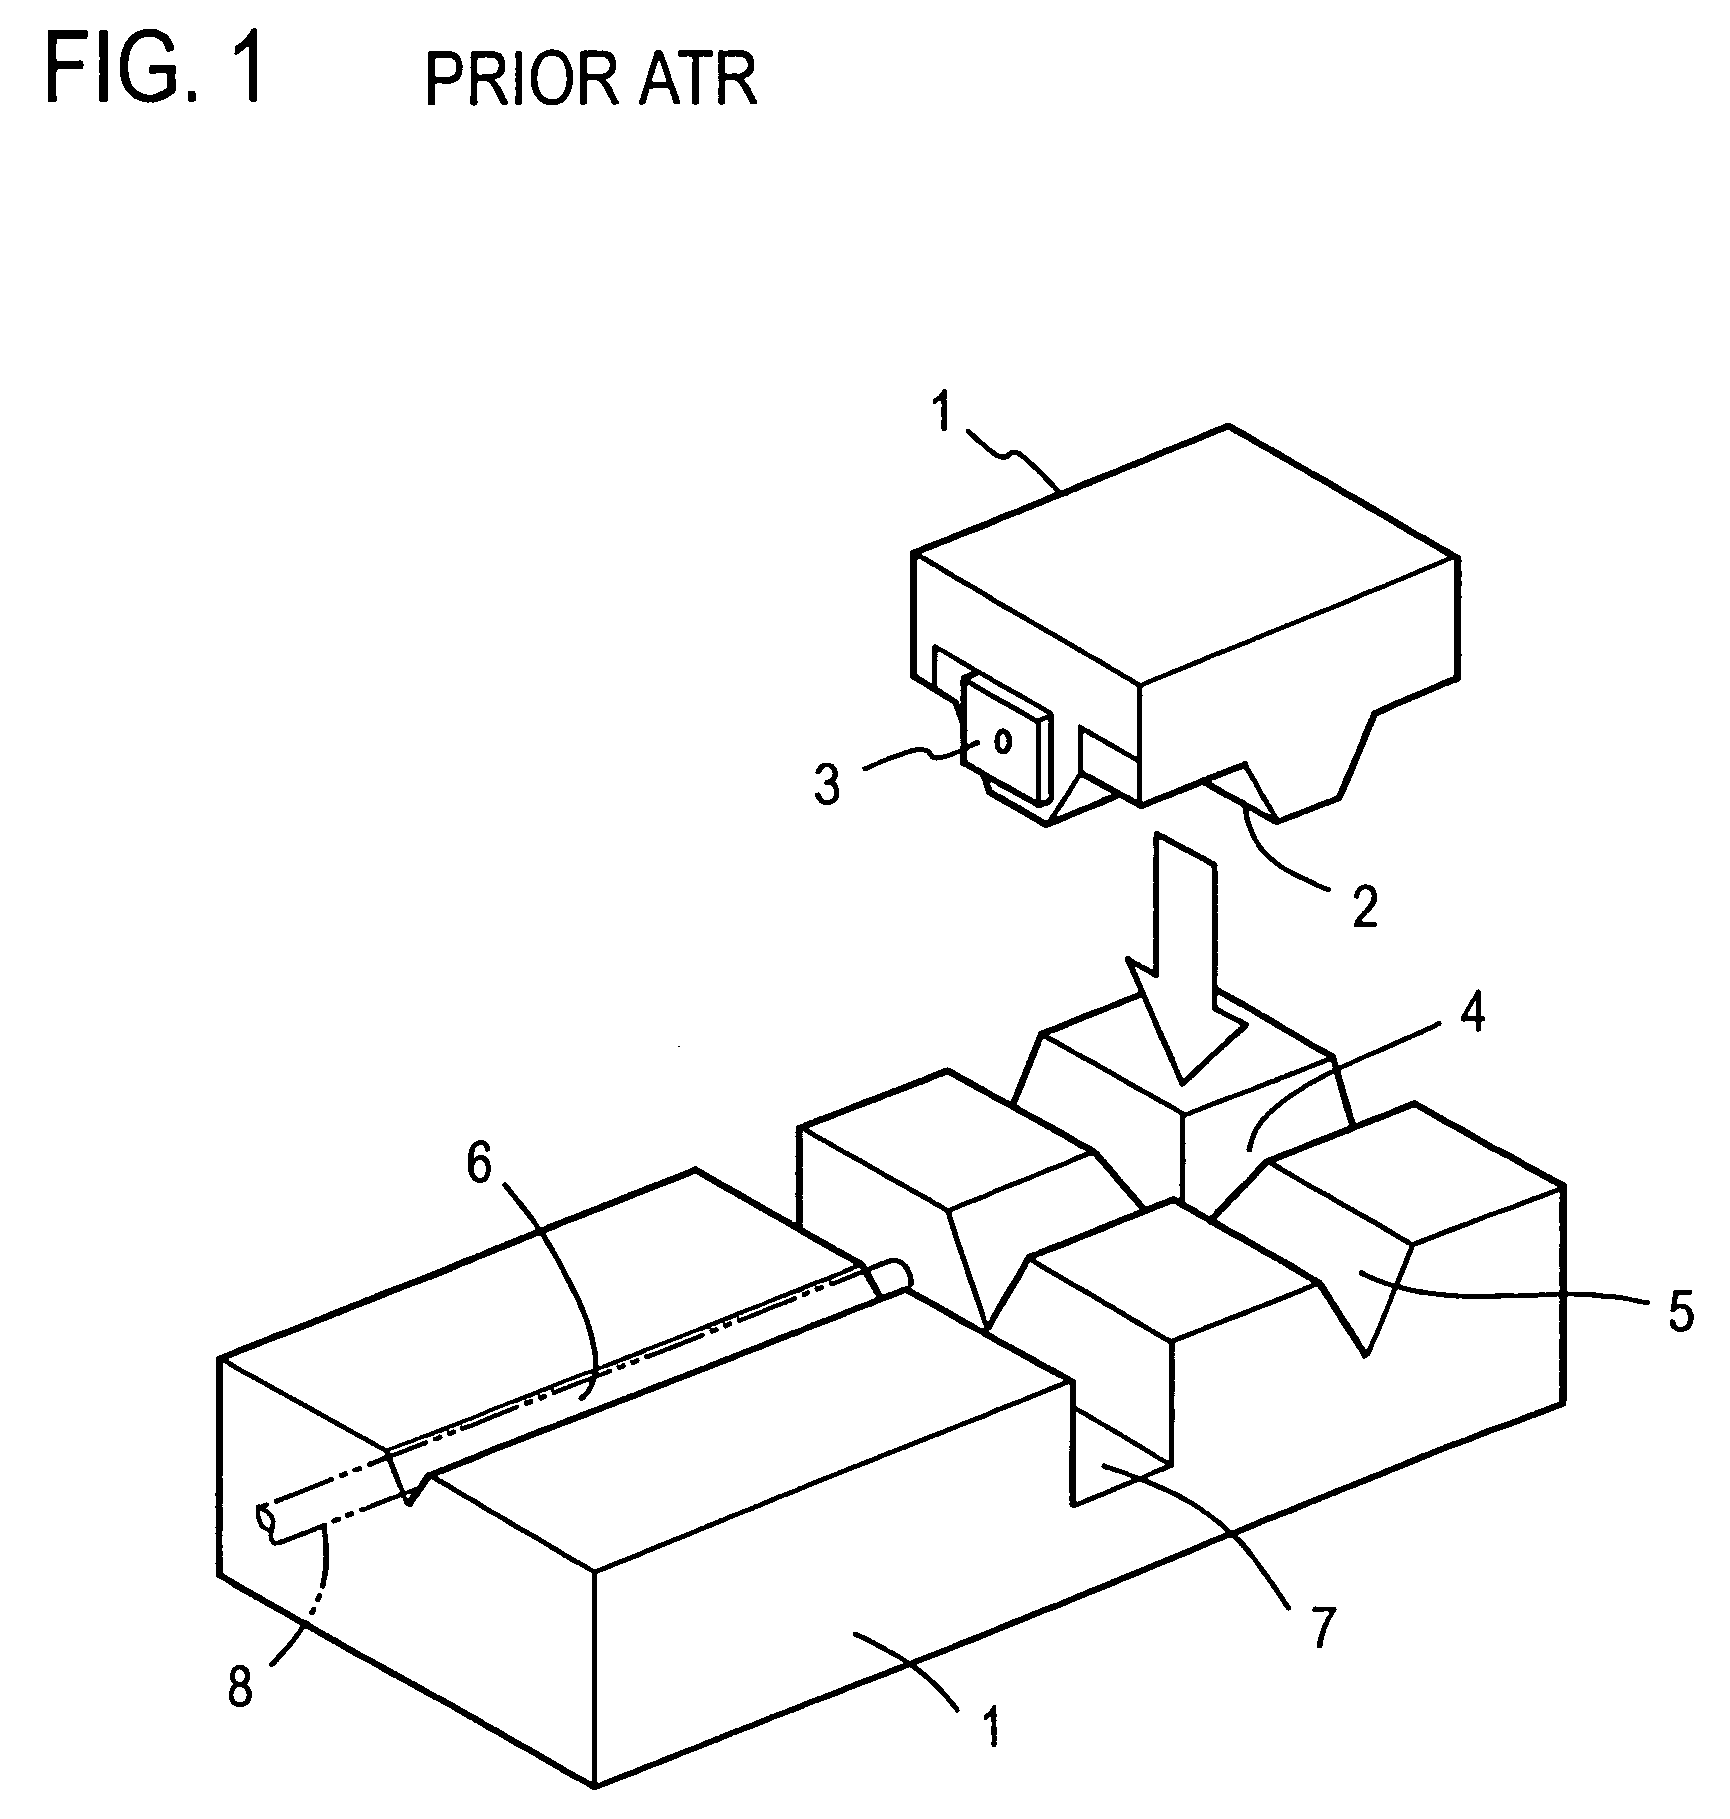 Optical element assembly and method of making the same